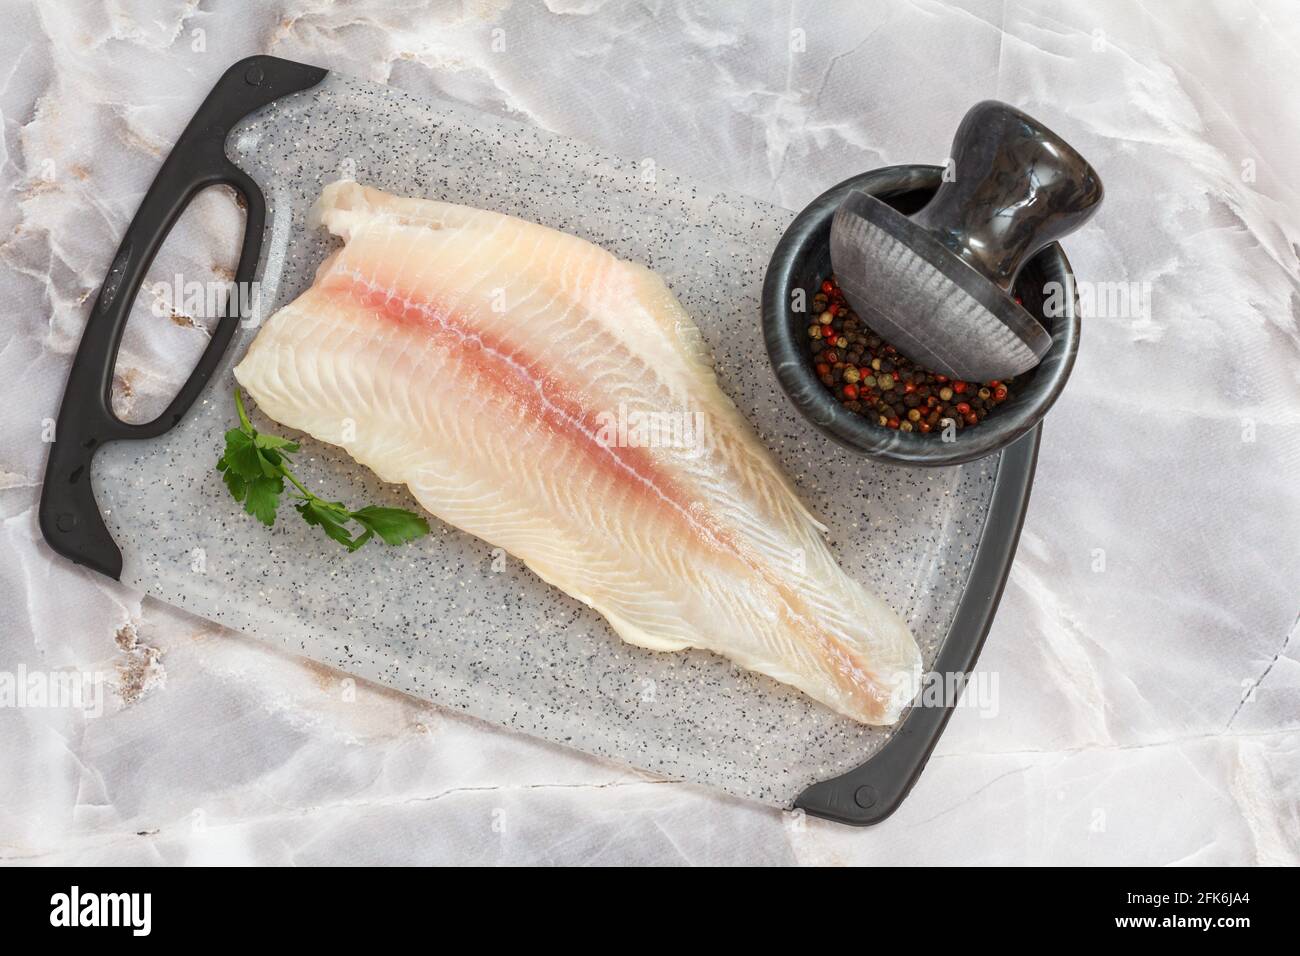 Fillet of raw pangasius fish with parsley leaves and spices on a cutting board laying on the stone kitchen table. Top view. Stock Photo